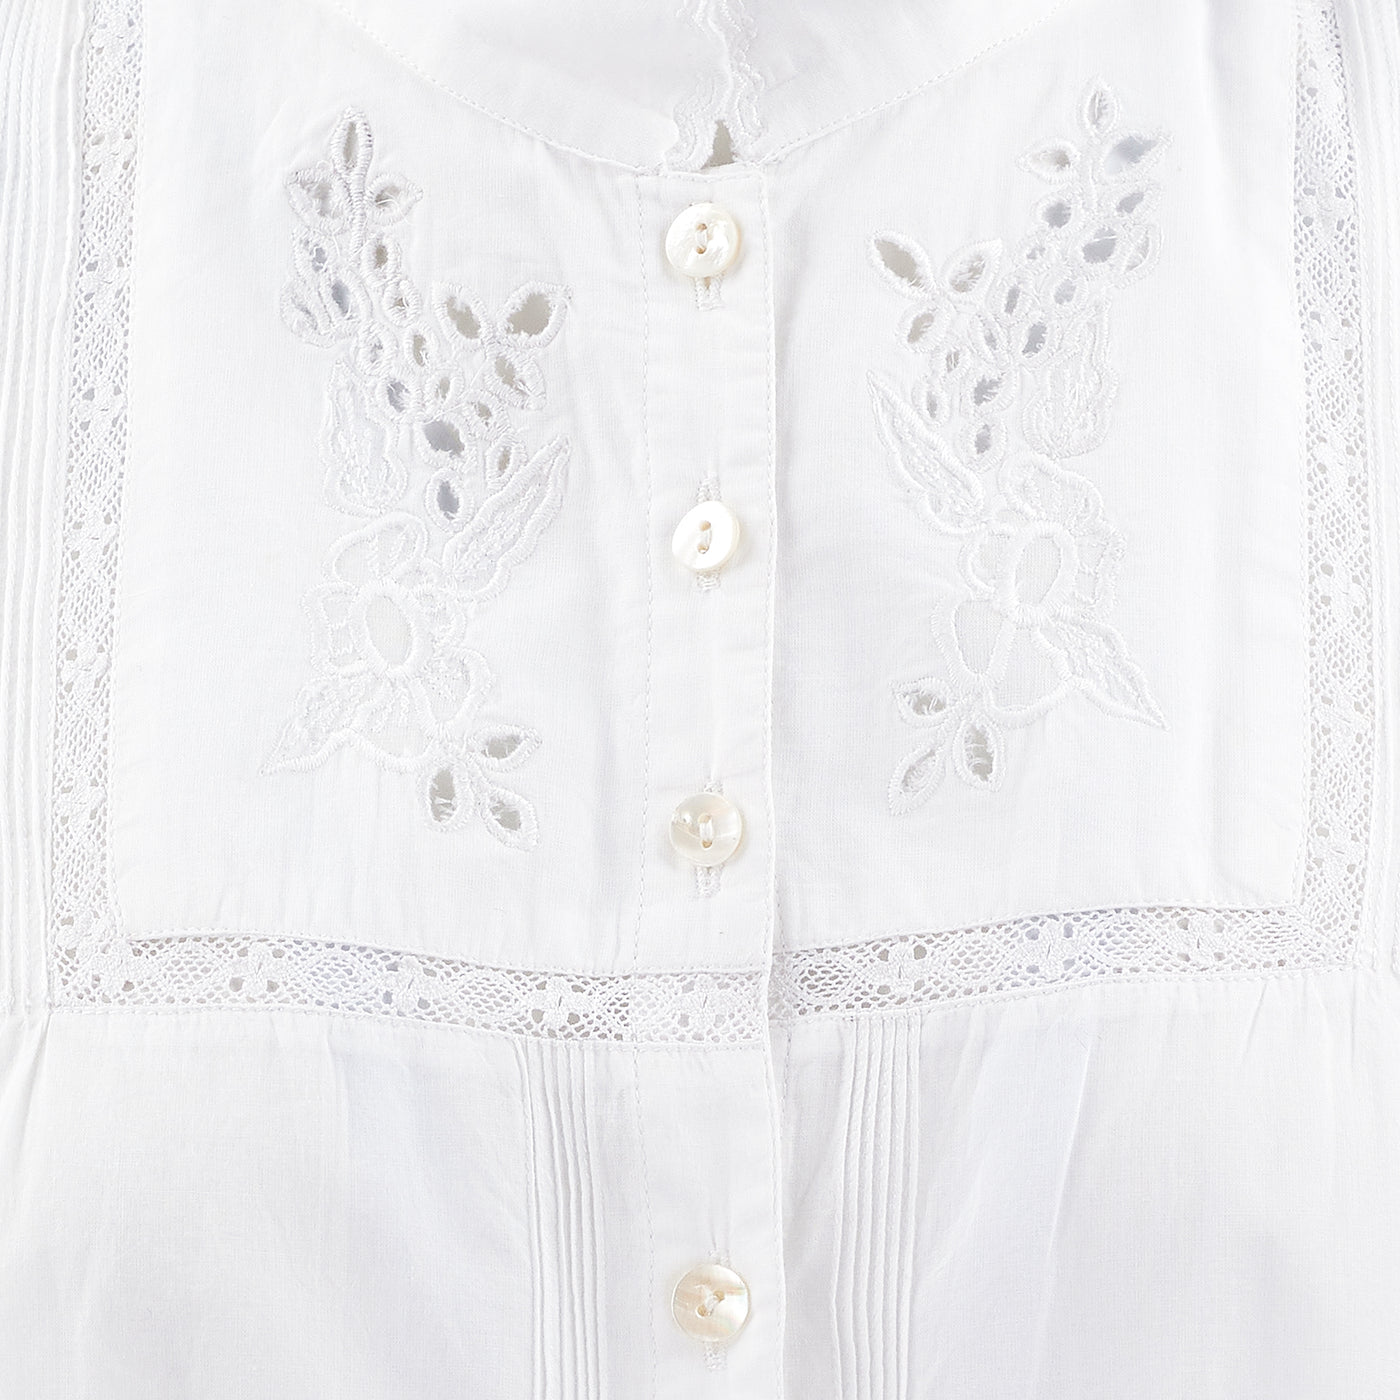 Mila lace insert shirt in white